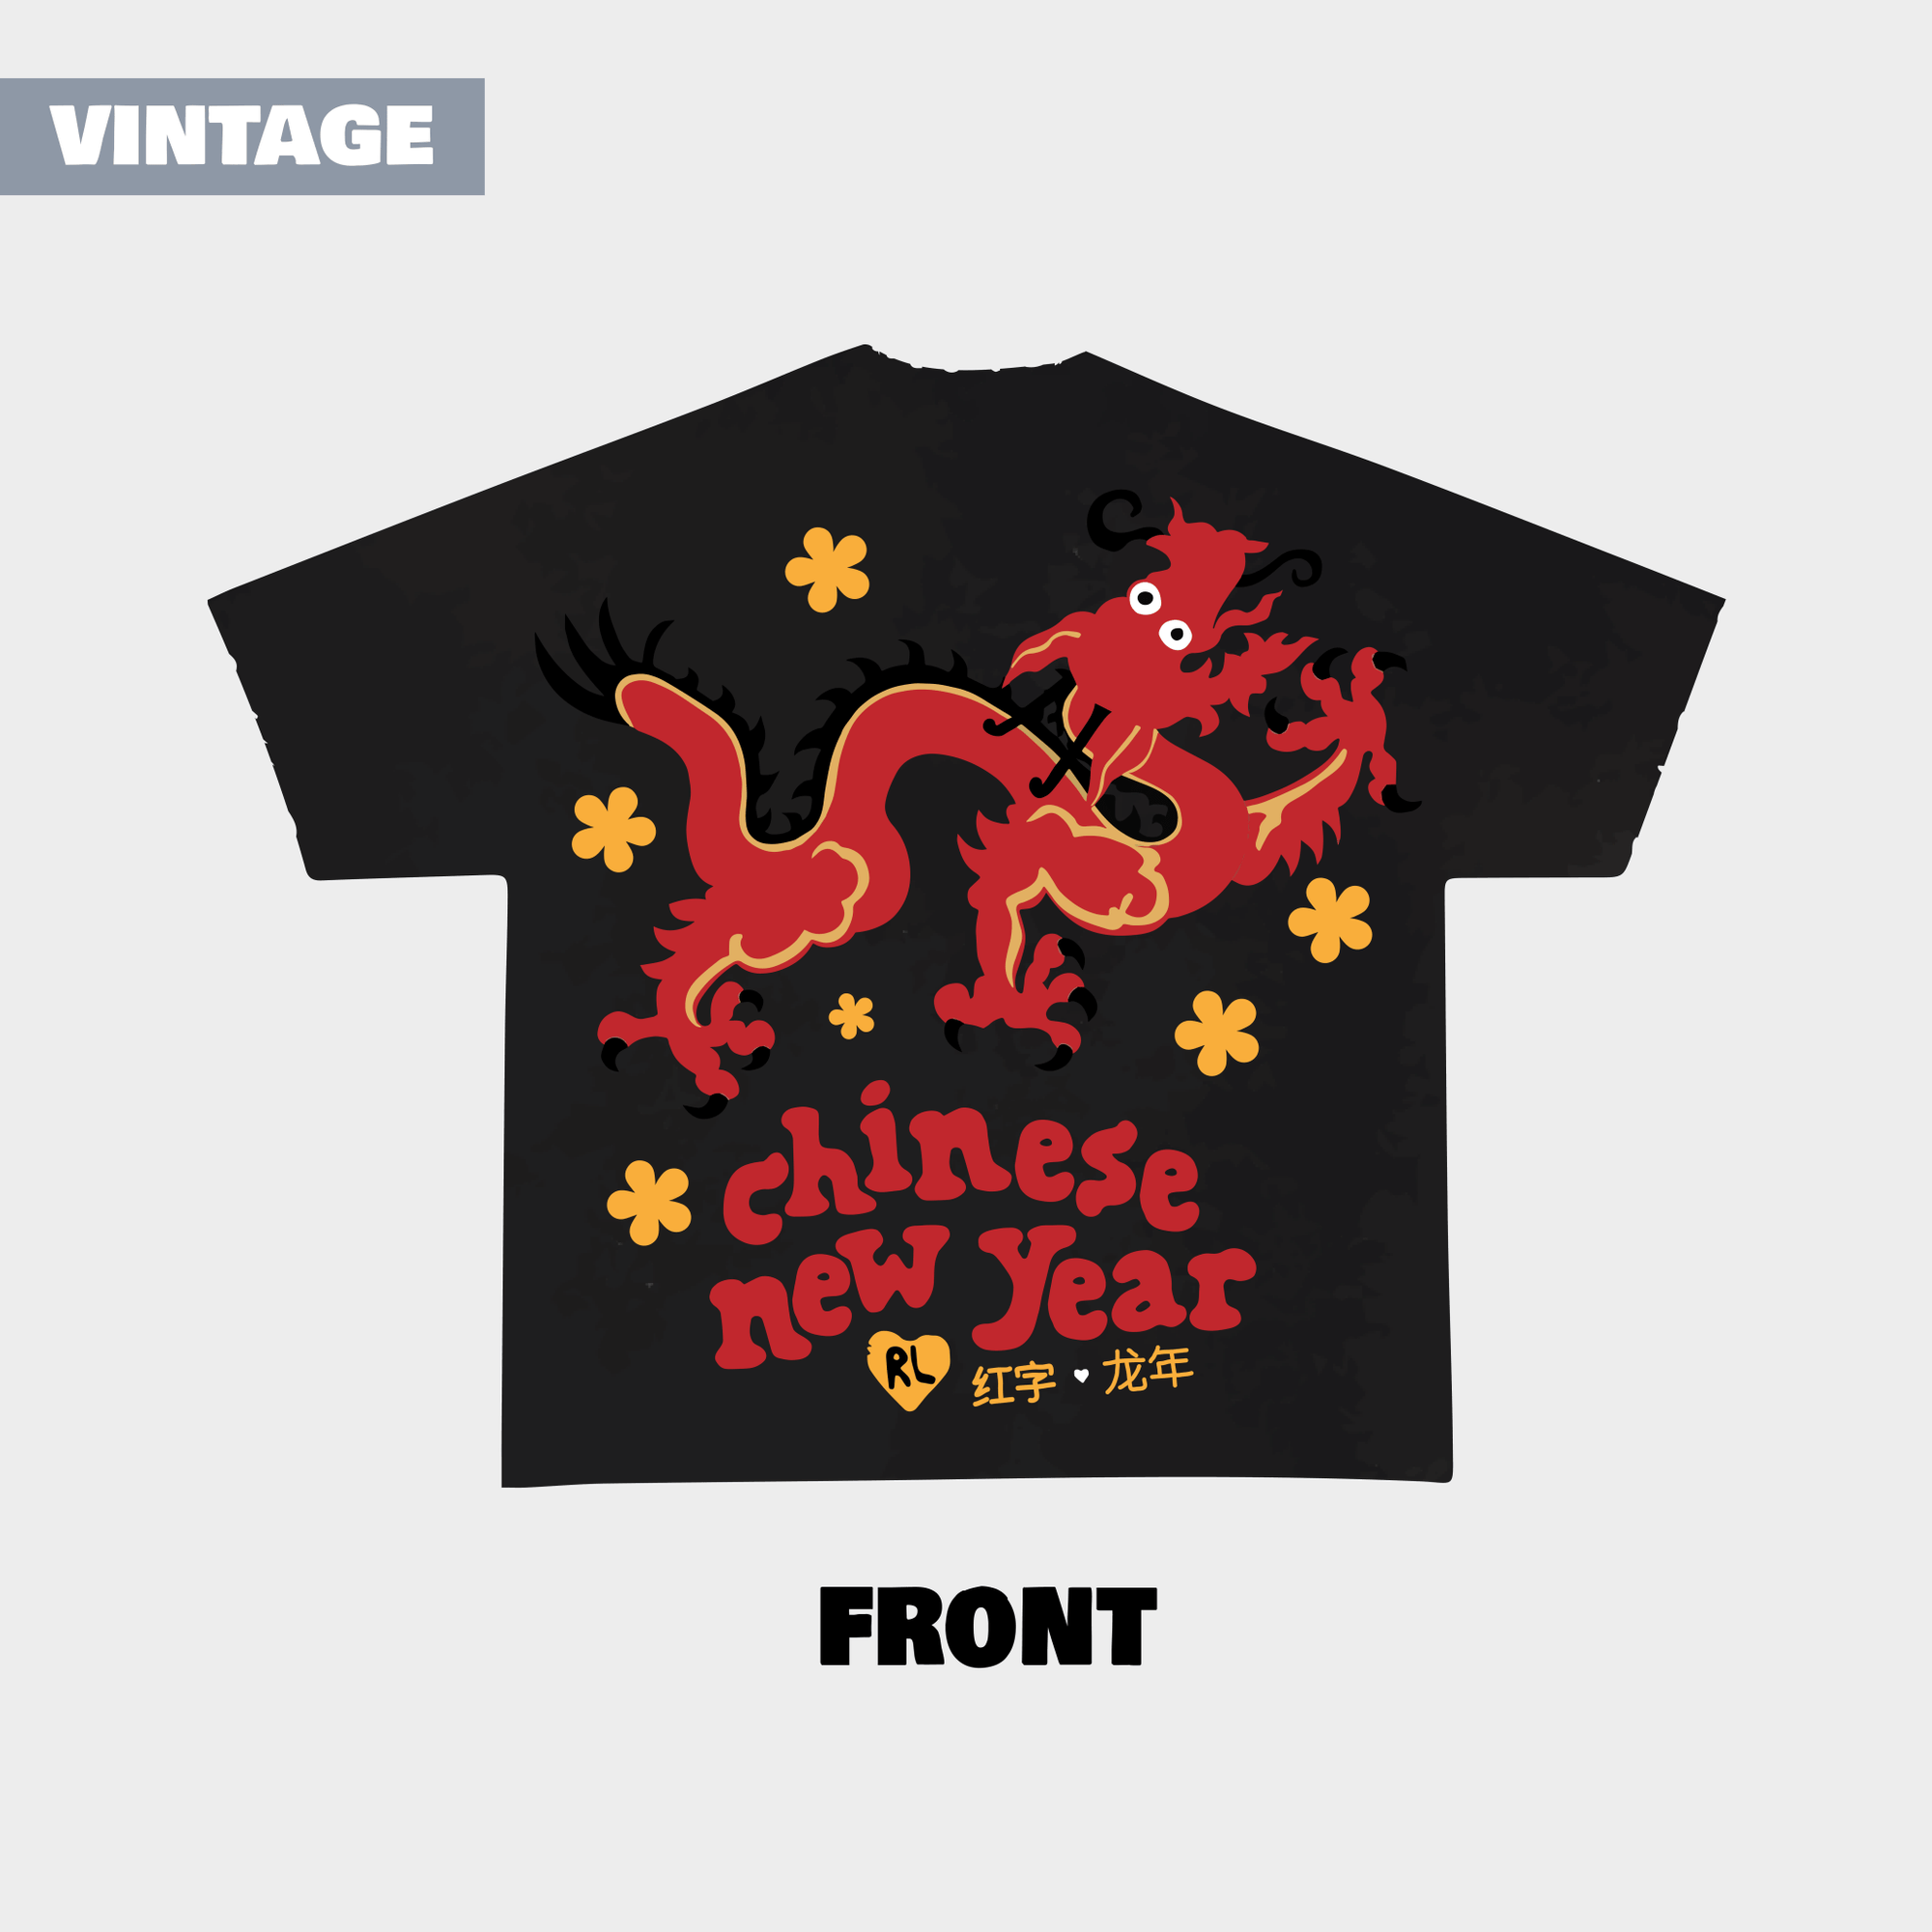 "Chinese New Year" Vintage Tee - RED LETTERS